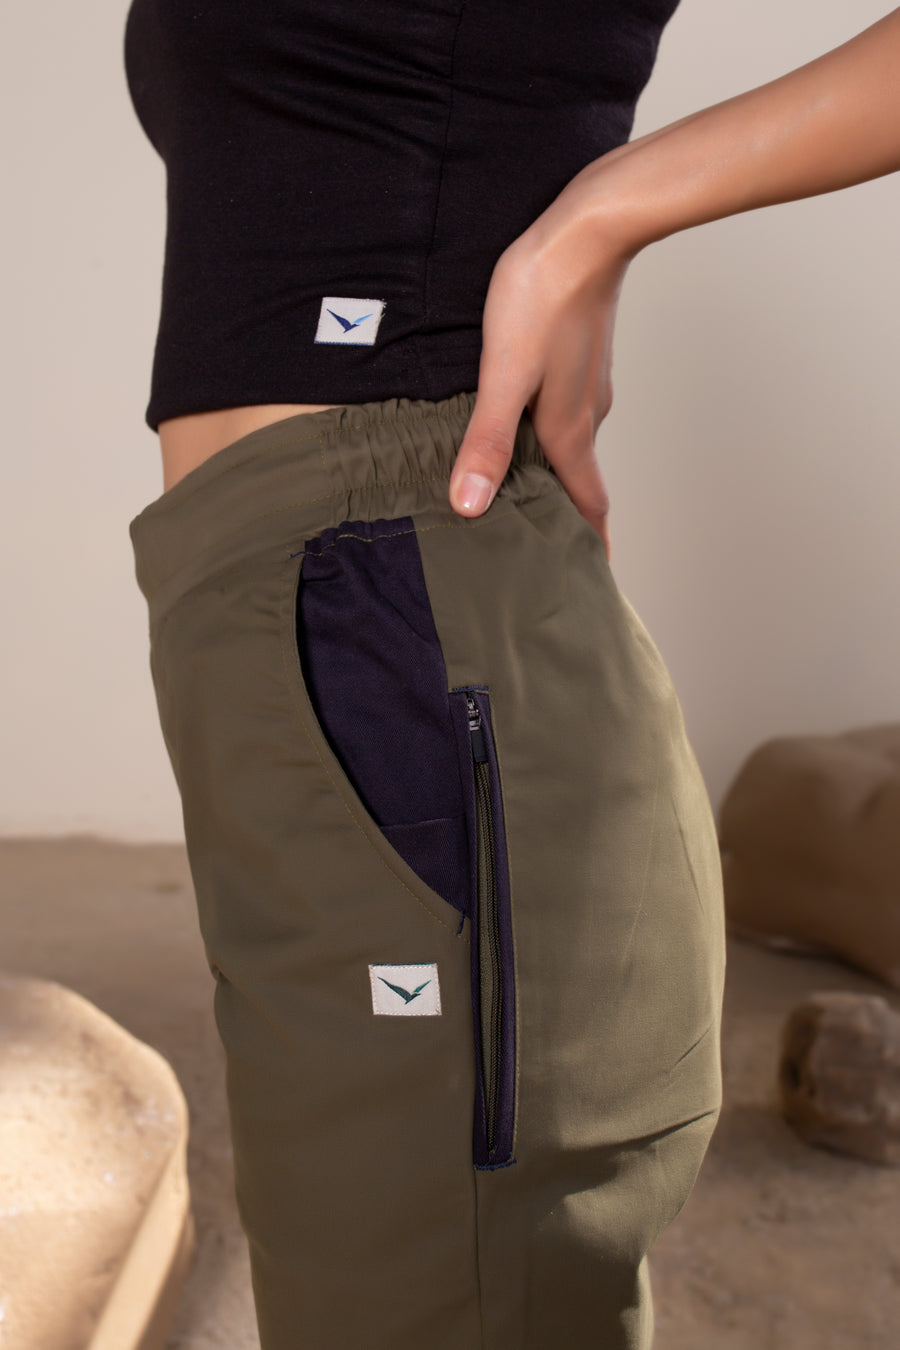 Women's Terra Joggers Olive Green | VOLO Apparel | Designed for you to rock climb, hike, yoga, run or just chill. The most versatile athletic joggers that are fitted for your every daily life and all your athletic endeavors. The Earth Joggers comes with five pockets, features a 3 point gusset, 2 zipper pockets, snap buttons, and a breathable stretchy spandex cotton twill. With an internal drawstring and a tailored fit, these are gonna be your go to adventure joggers.